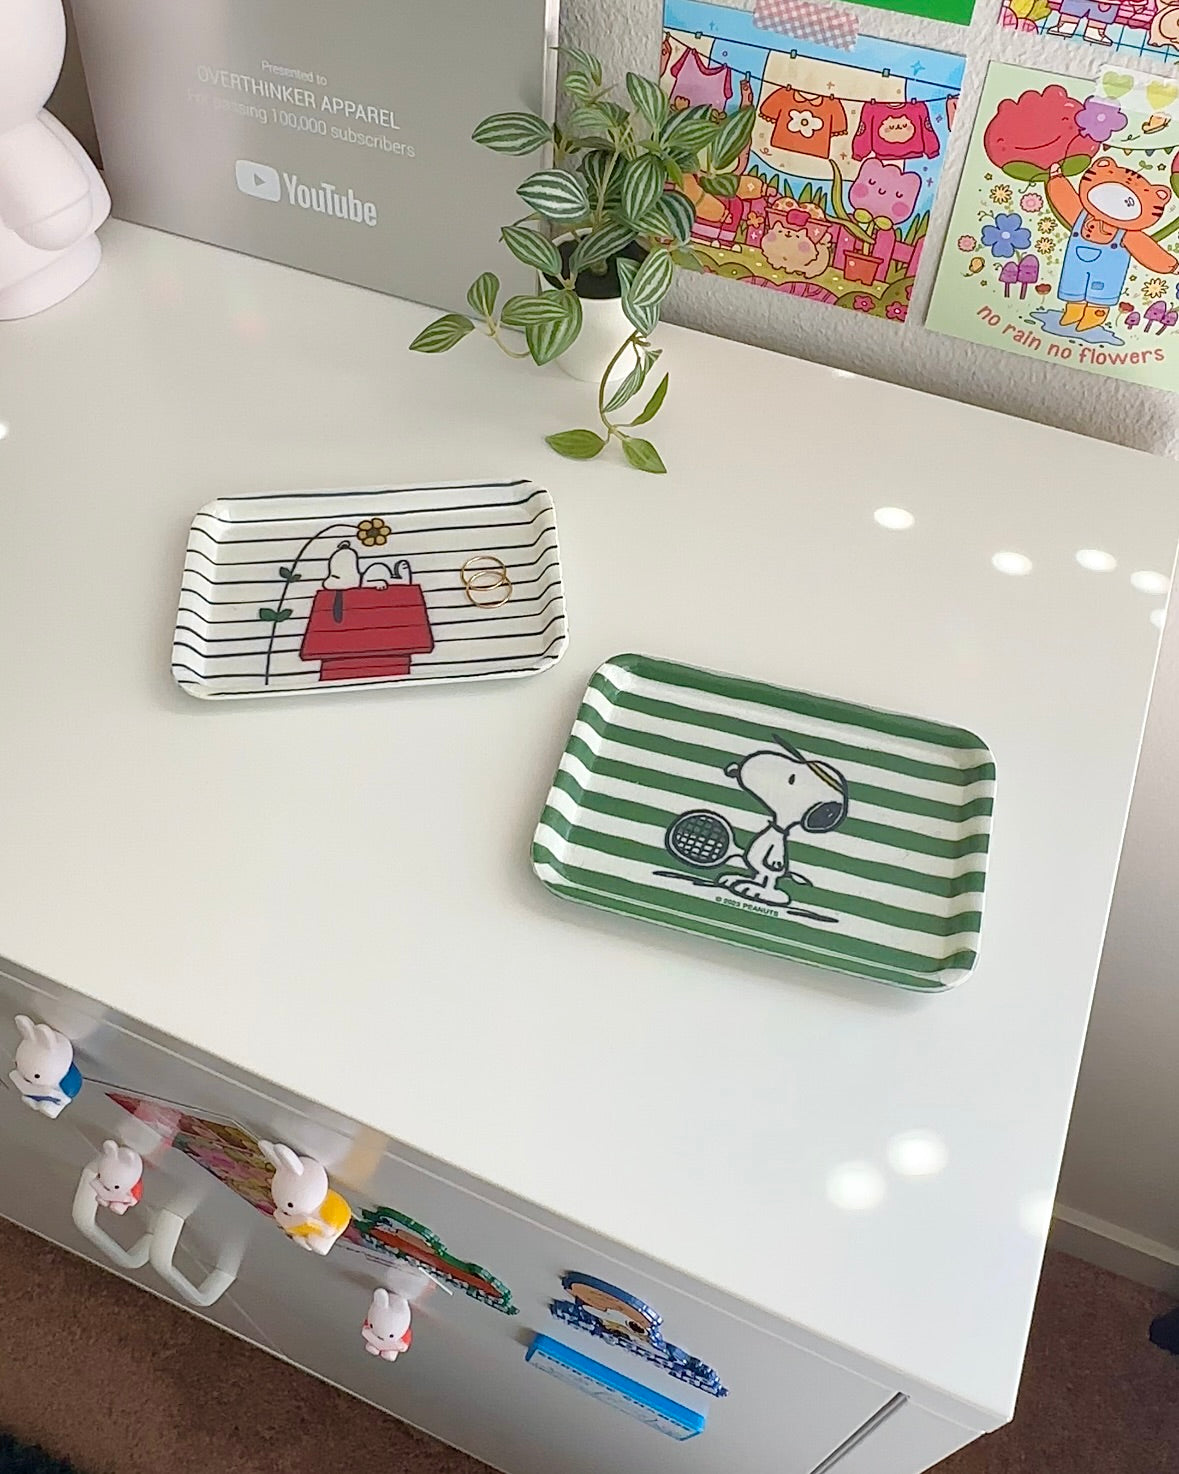 Snoopy Vintage-Style Tray - Tennis